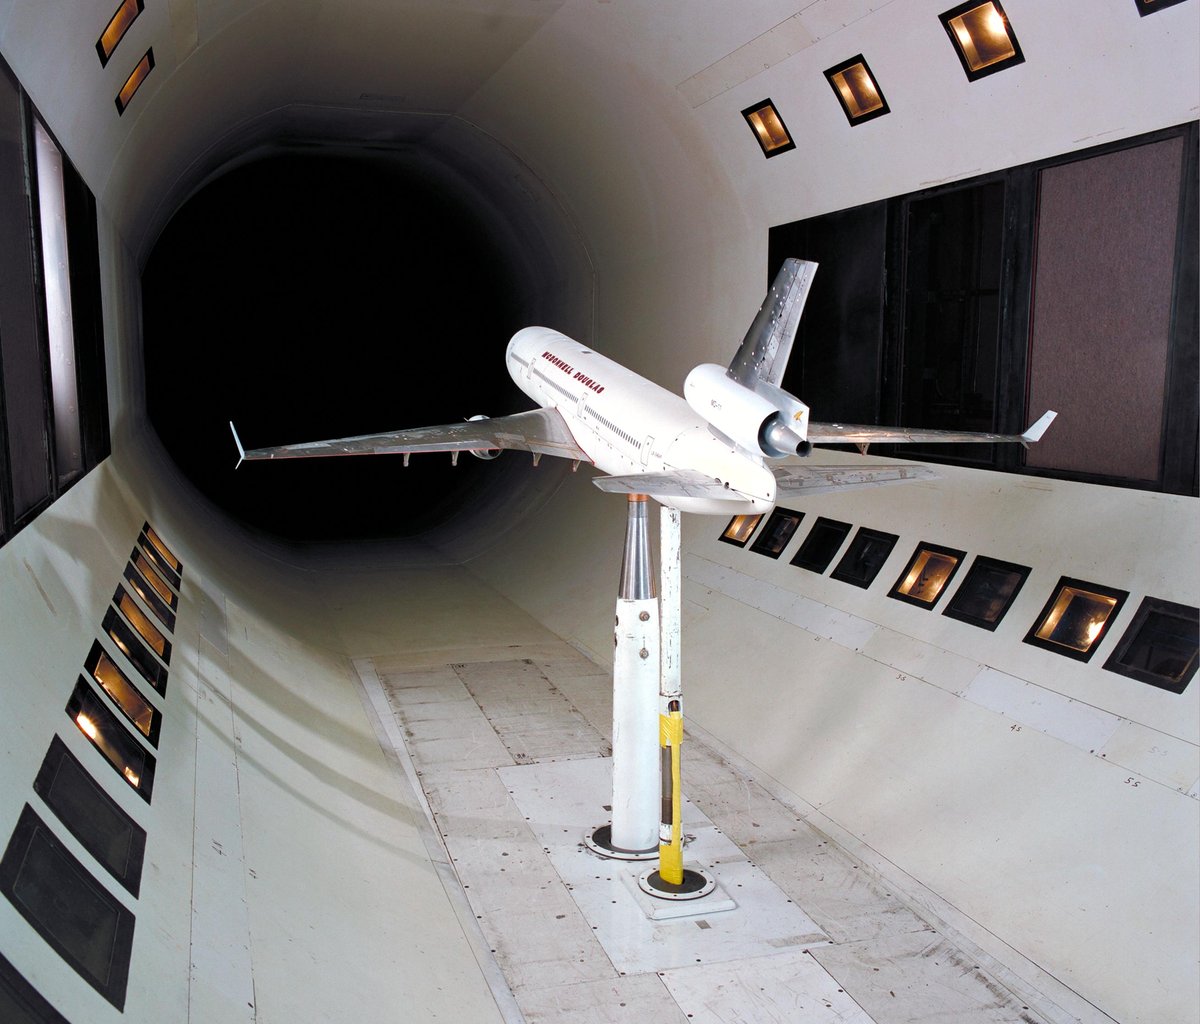 NASA wind tunnel with the scale model of an aeroplane.